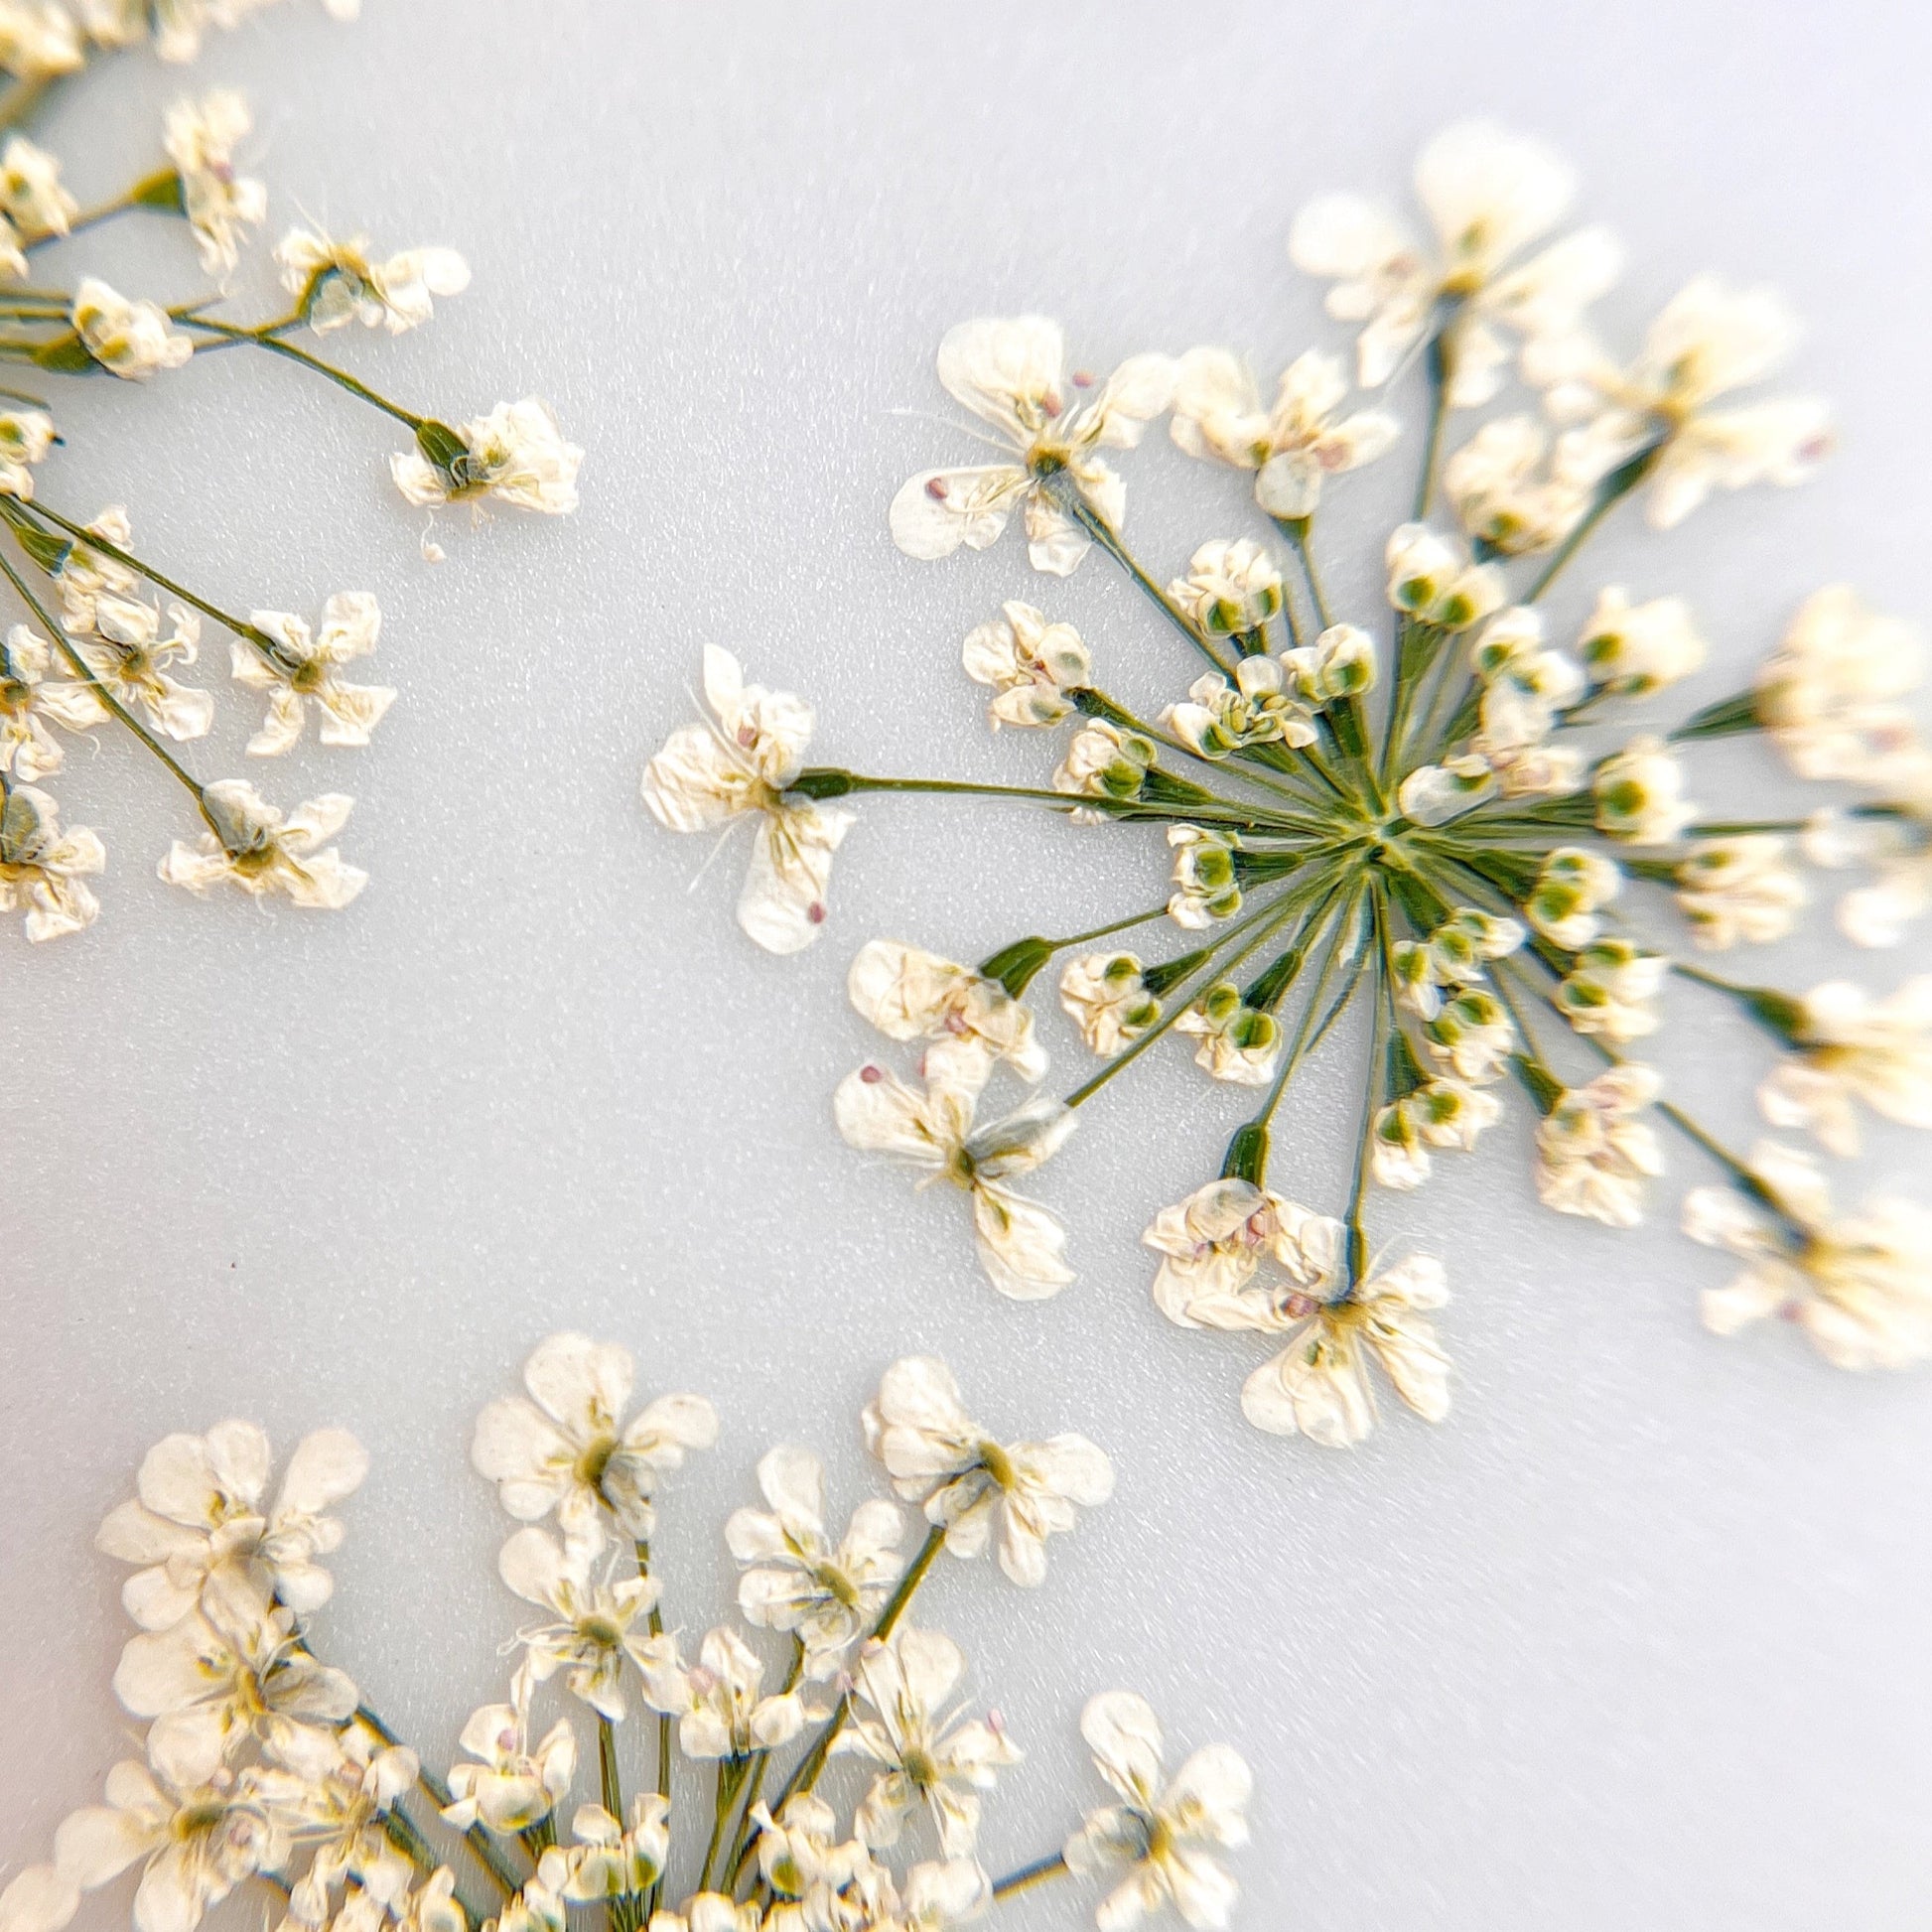 Pressed flower clusters scattered on white background. 